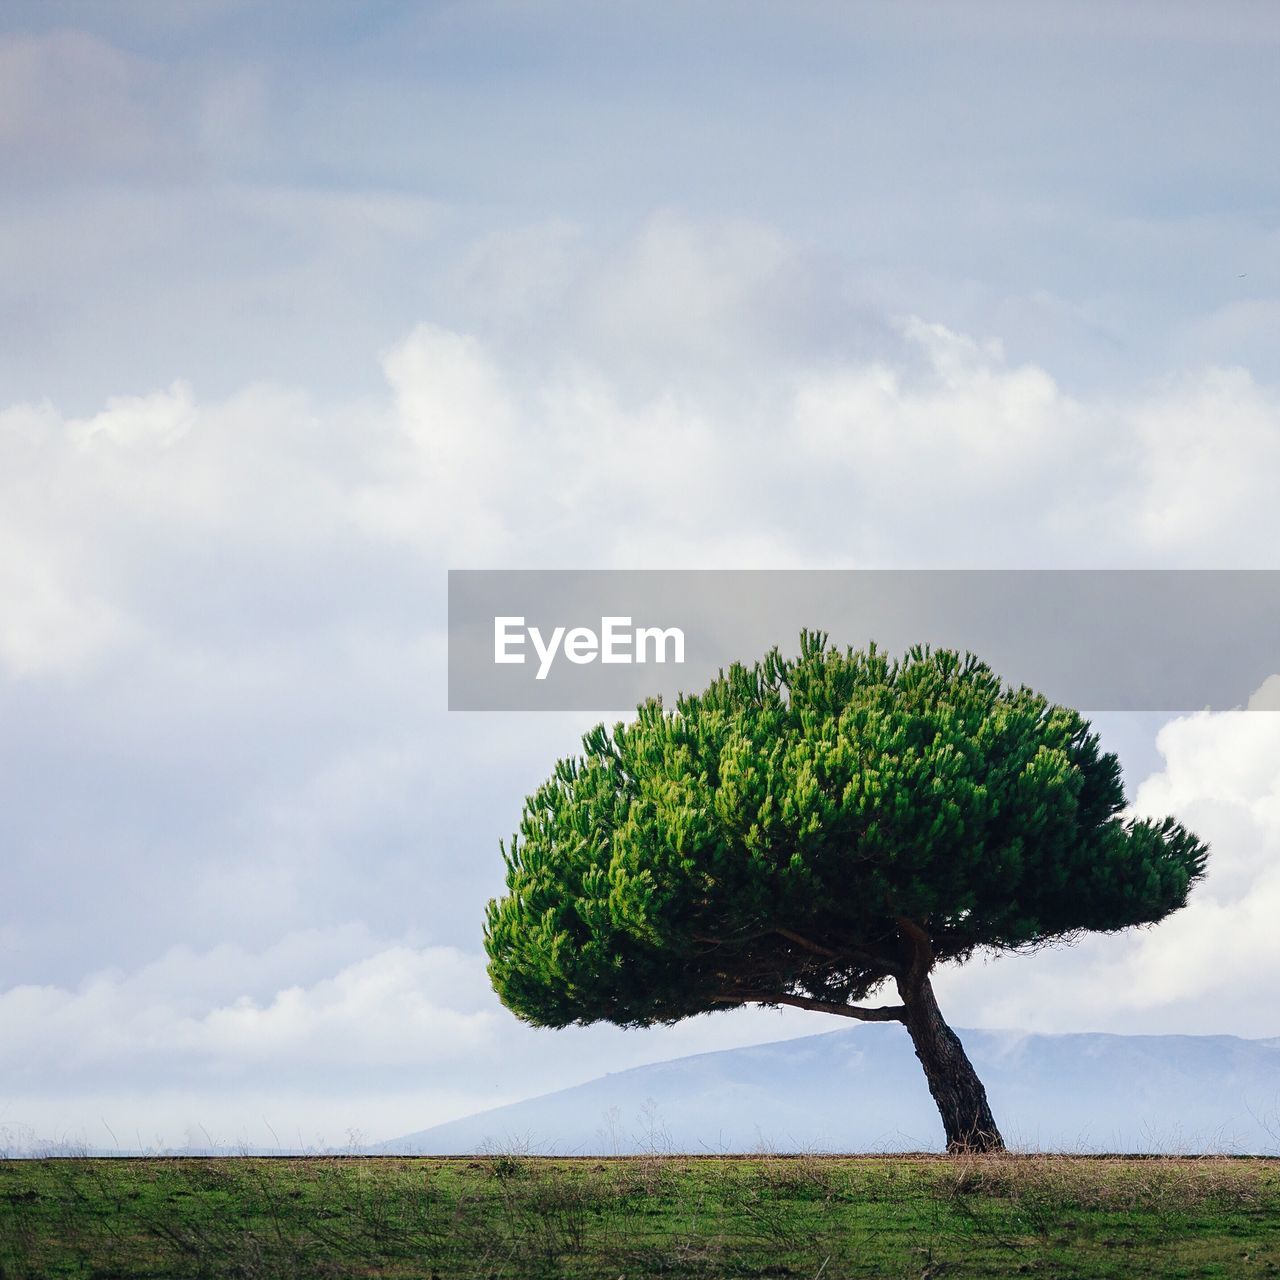 Tree on grassy field against cloudy sky